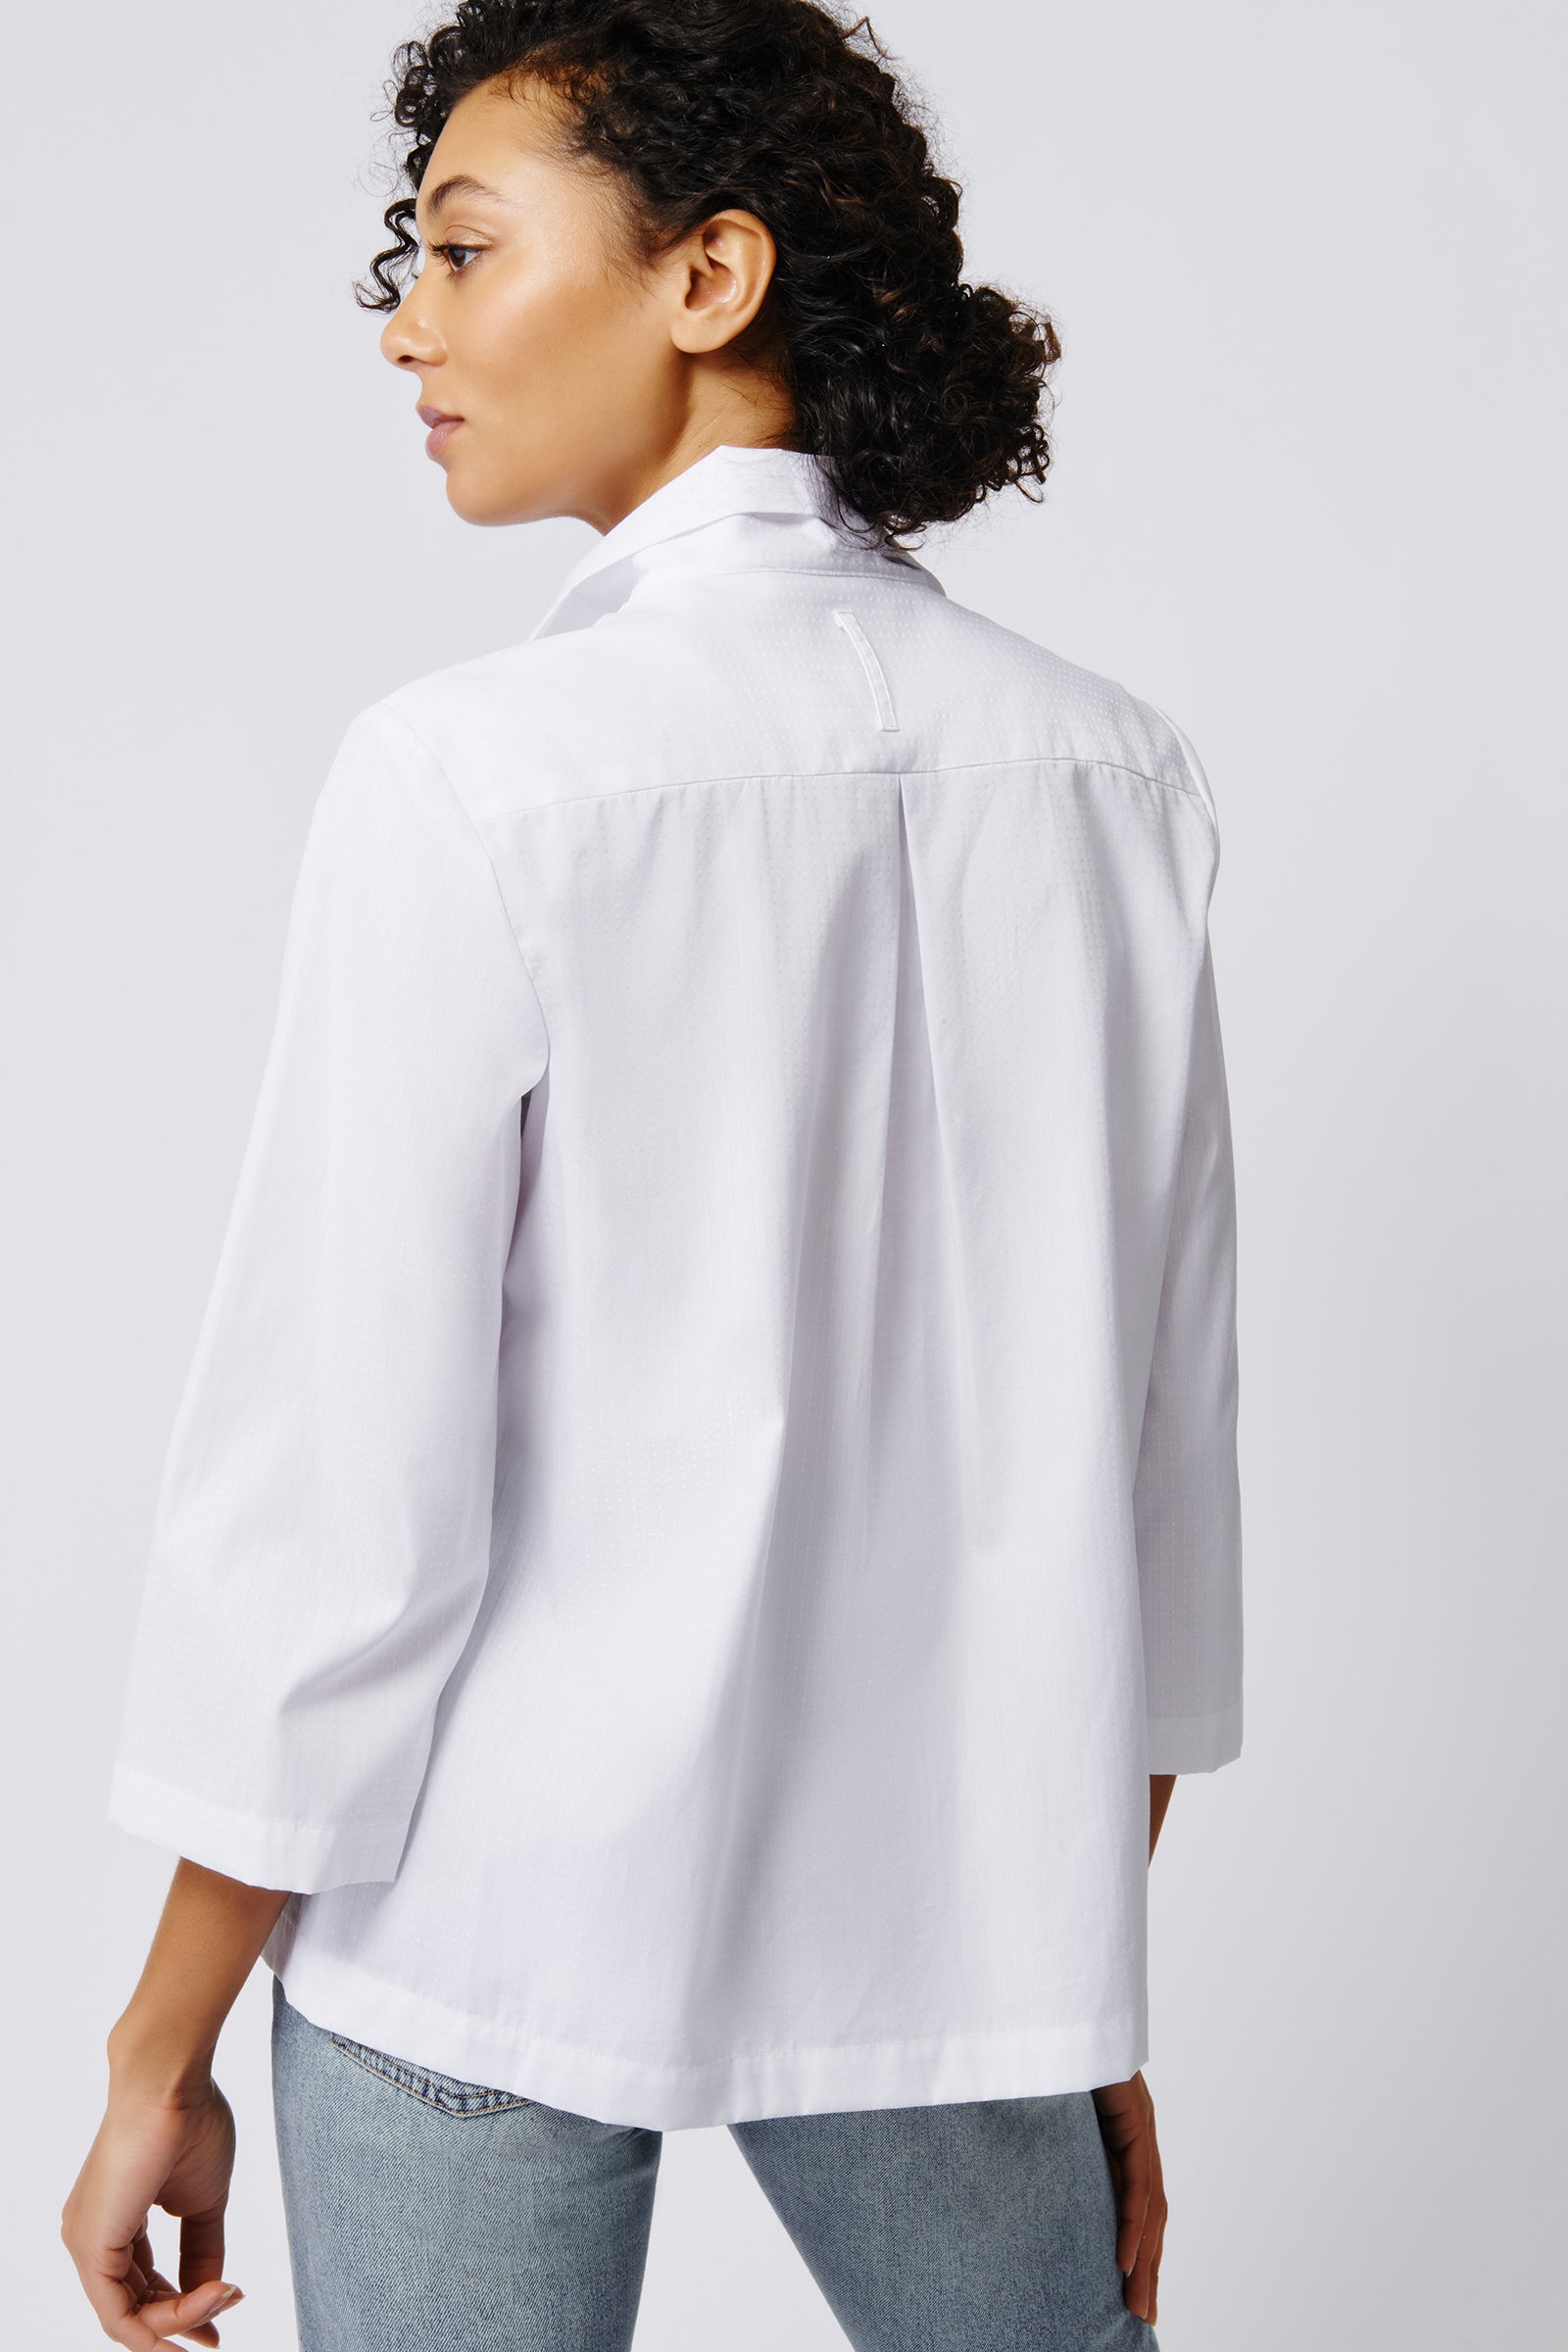 Kal Rieman 3/4 sleeve Ginna shirt in white stretch on model back view hands crossed